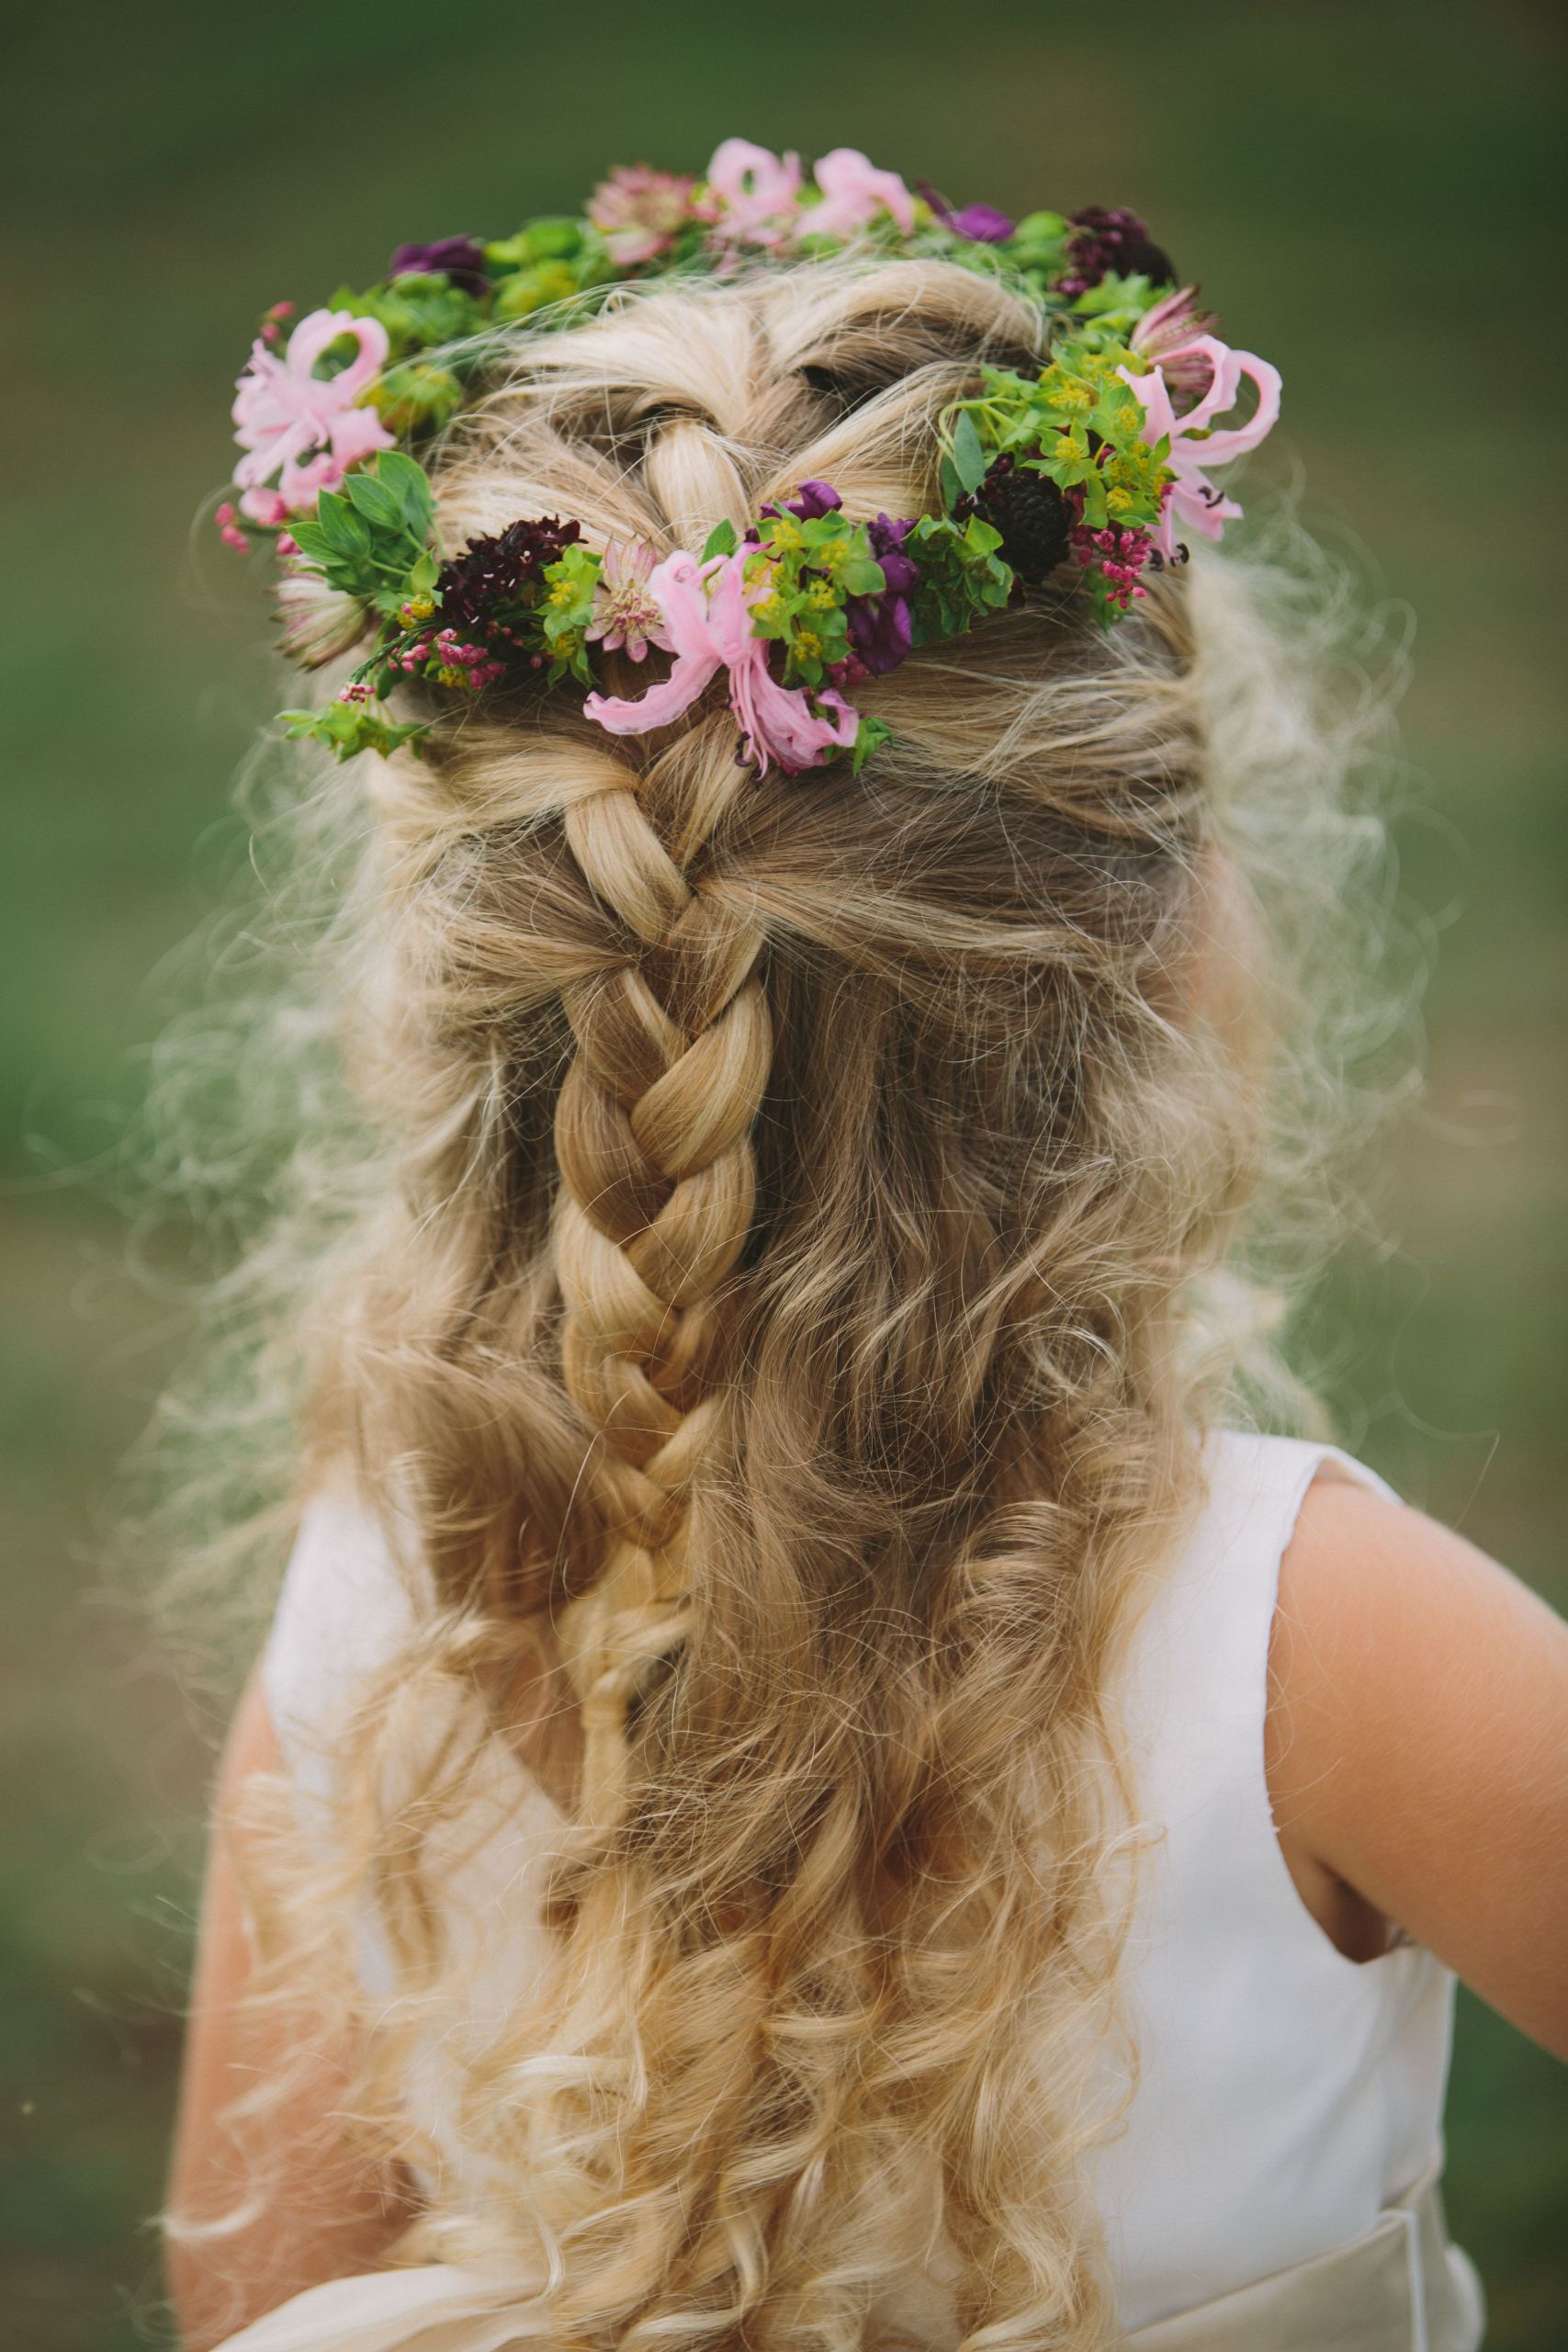 Wedding Hairstyles For Flower Girls
 Flower Girl Hair Braided natural and beautiful at